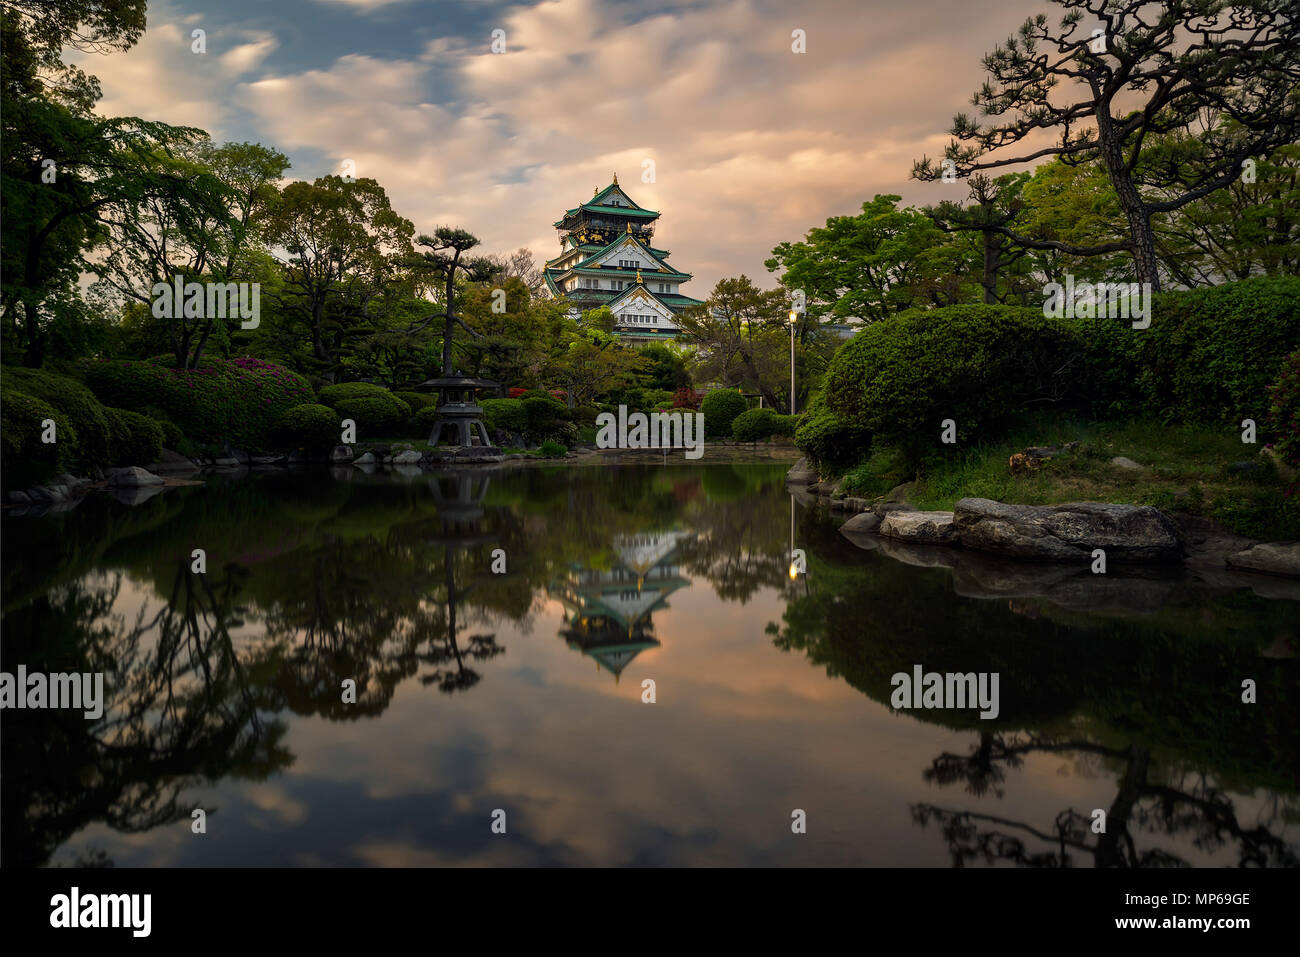 Osaka castle at sunset from the gardens Stock Photo